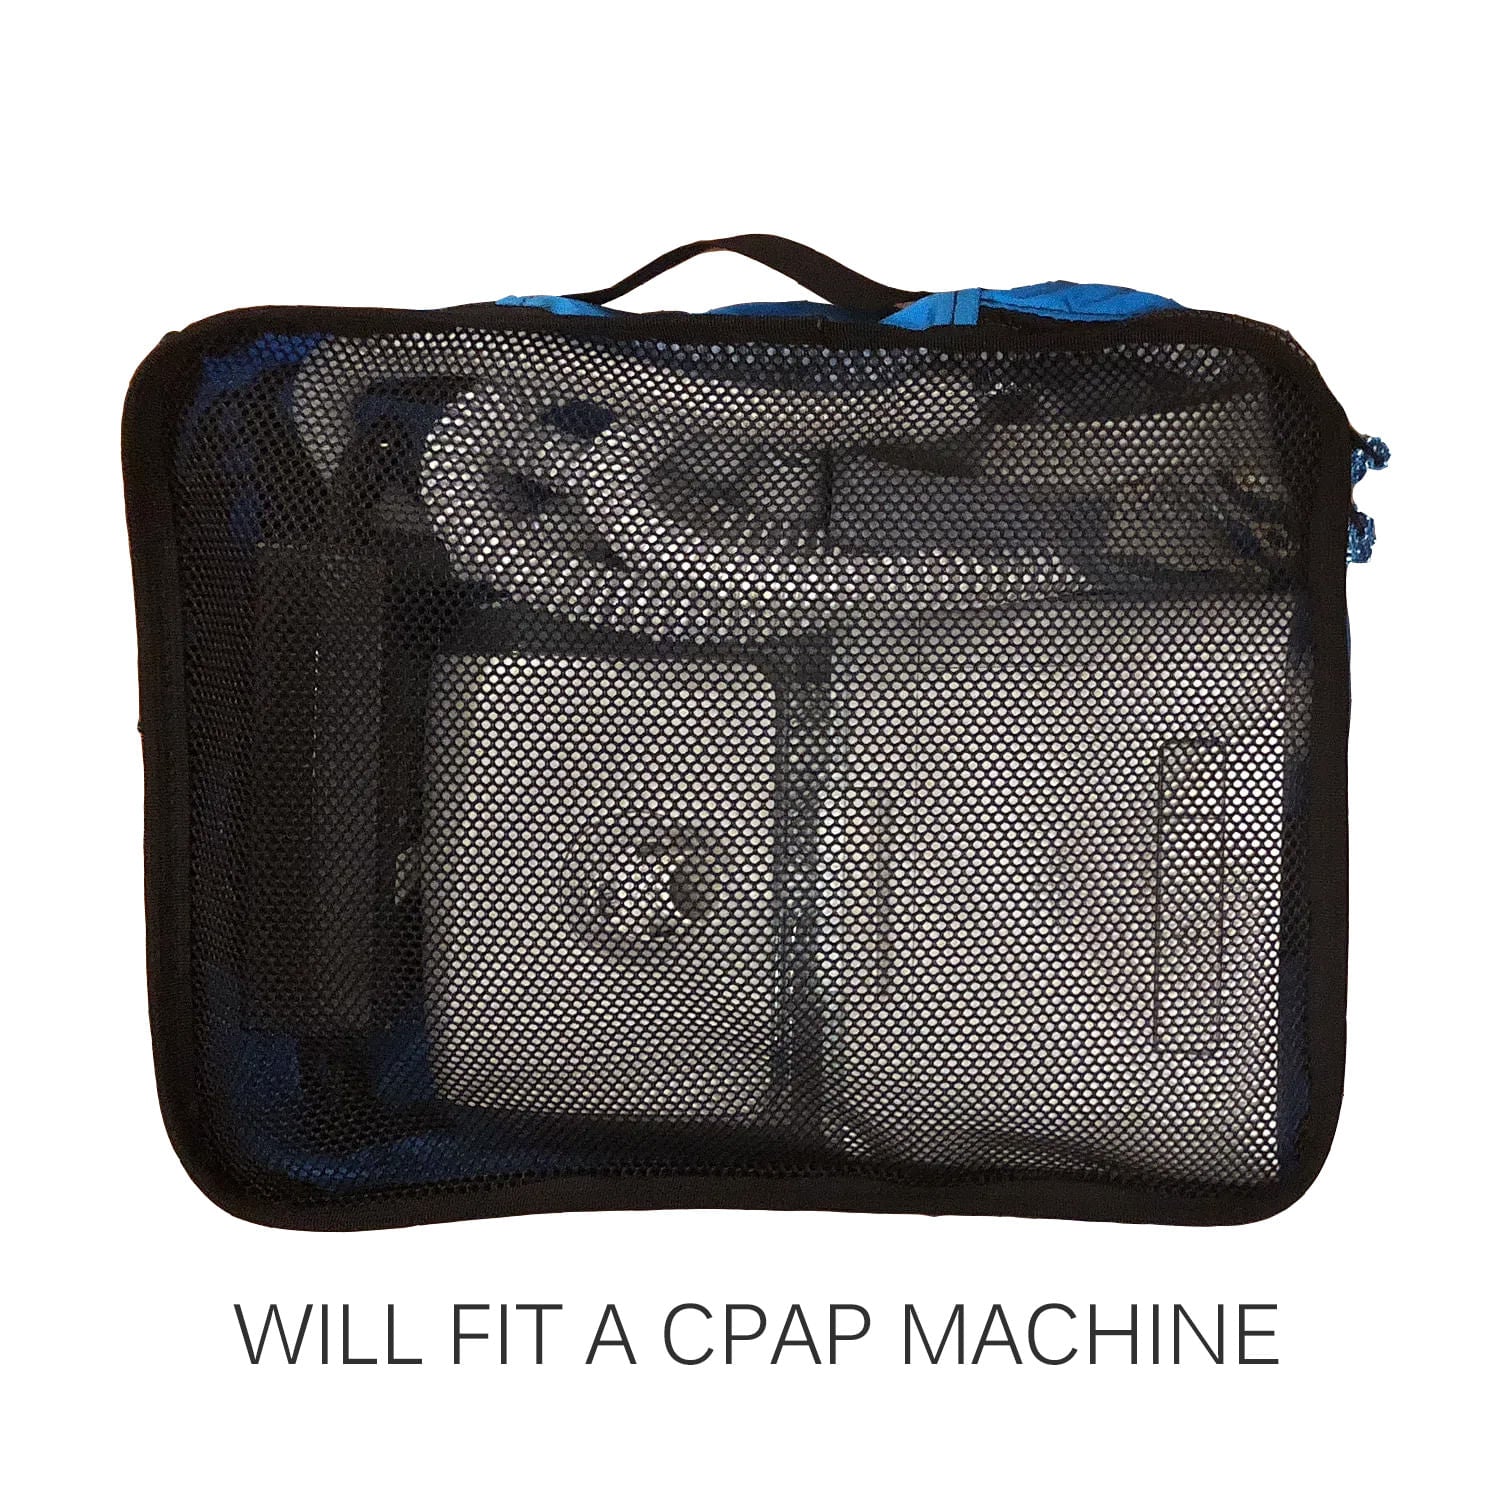 Kingfisher packing cube holds Cpap-machine. 